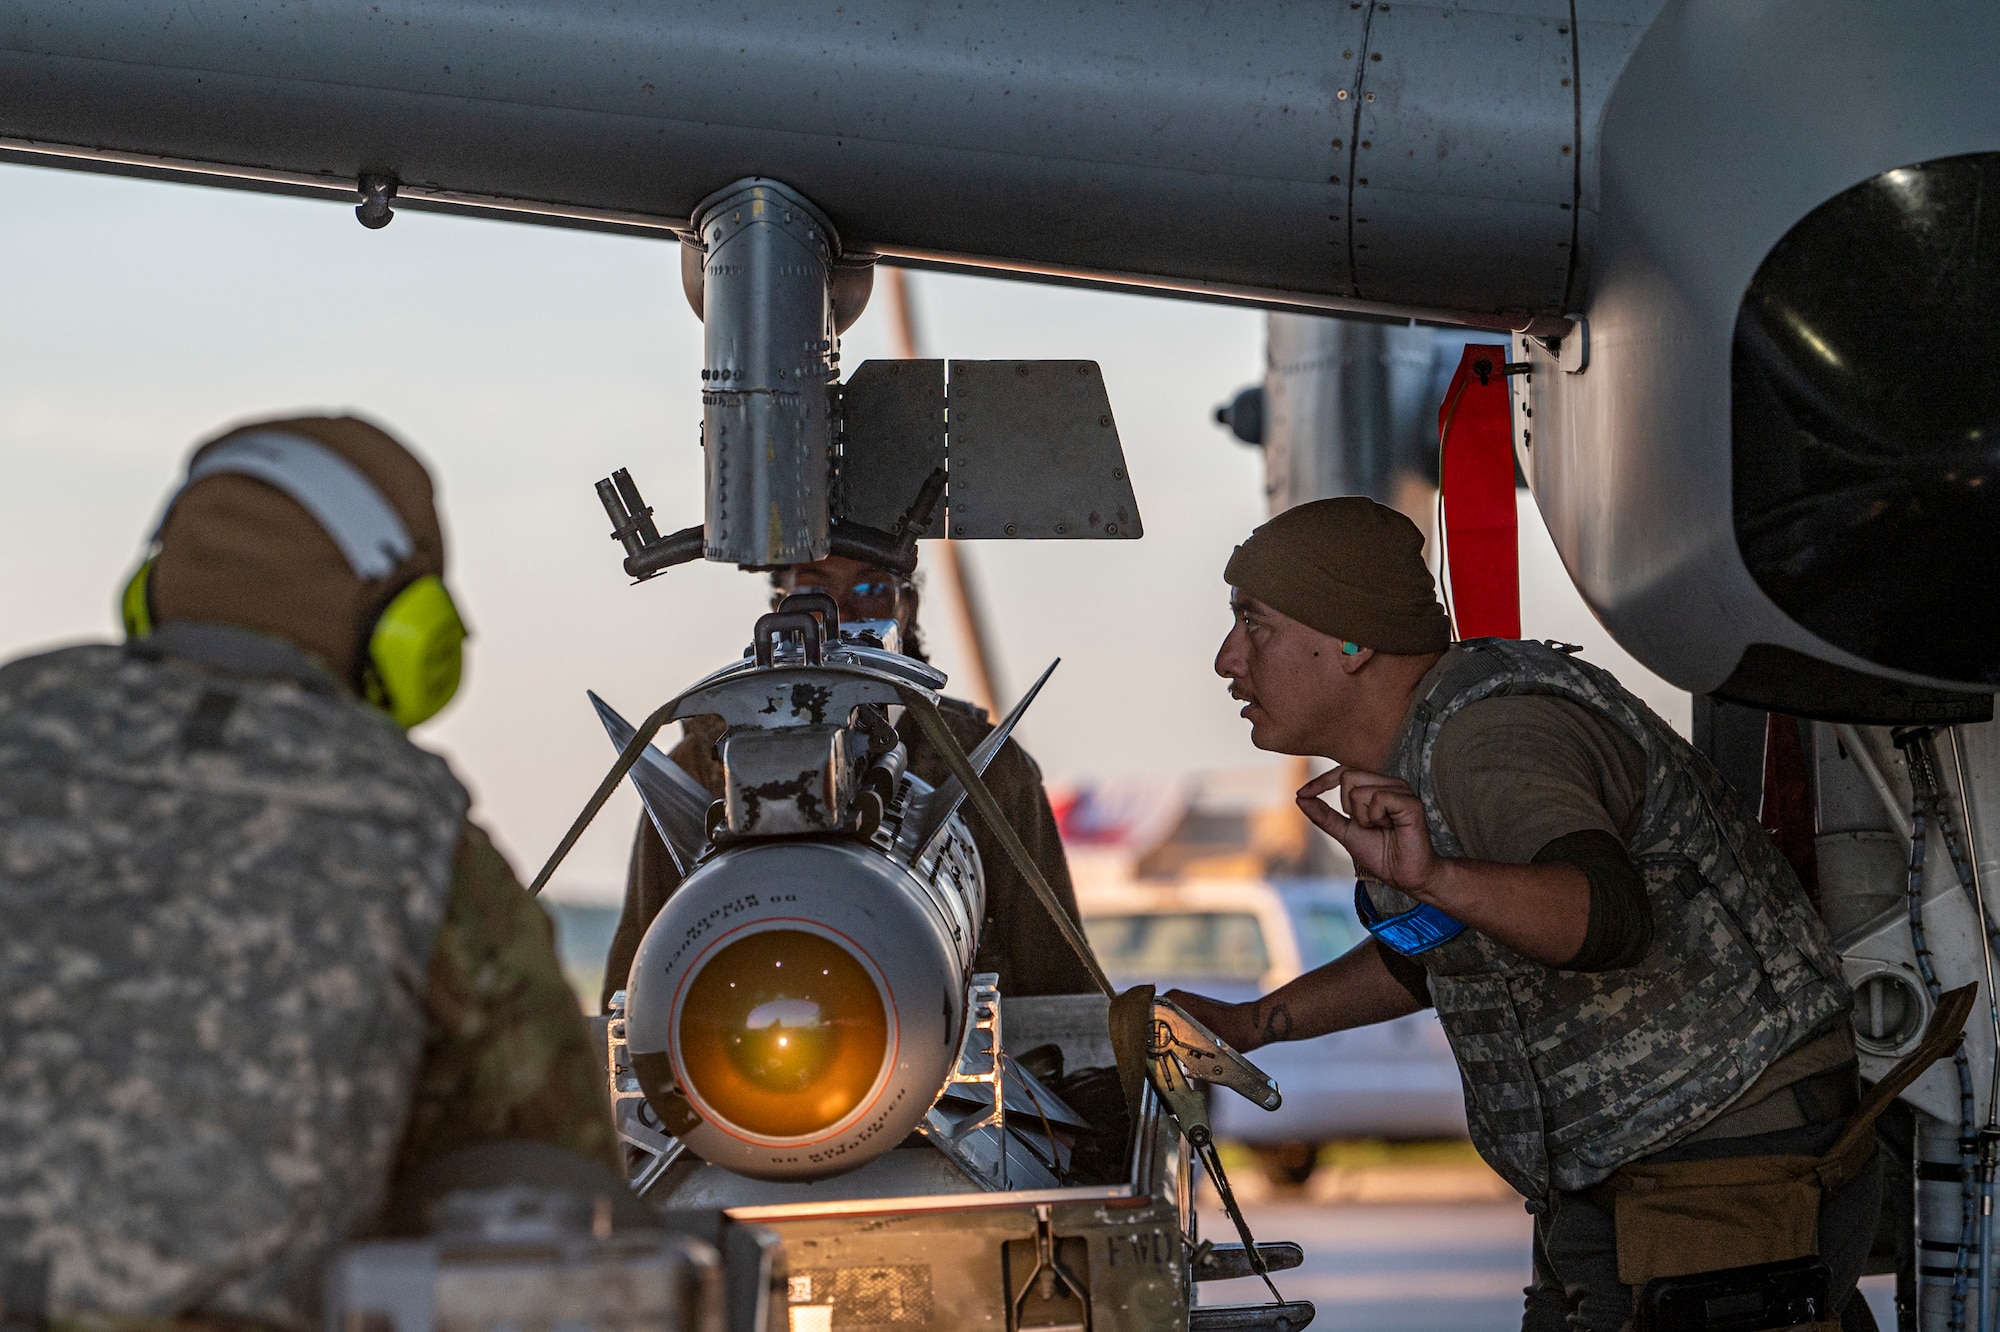 U.S. Air Force Airmen assigned to the 23rd Maintenance Group load a missile during Exercise Ready Tiger 24-1 at Avon Park Air Force Range, Florida, April 13, 2024. Weapons Airmen work hand-in-hand with crew chiefs to generate aircraft at a moment’s notice regardless of location. Ready Tiger 24-1 is a readiness exercise demonstrating the 23rd Wing’s ability to plan, prepare and execute operations and maintenance to project air power in contested and dispersed locations, defending the United States’ interests and allies. (U.S. Air Force photo by Airman 1st Class Leonid Soubbotine)